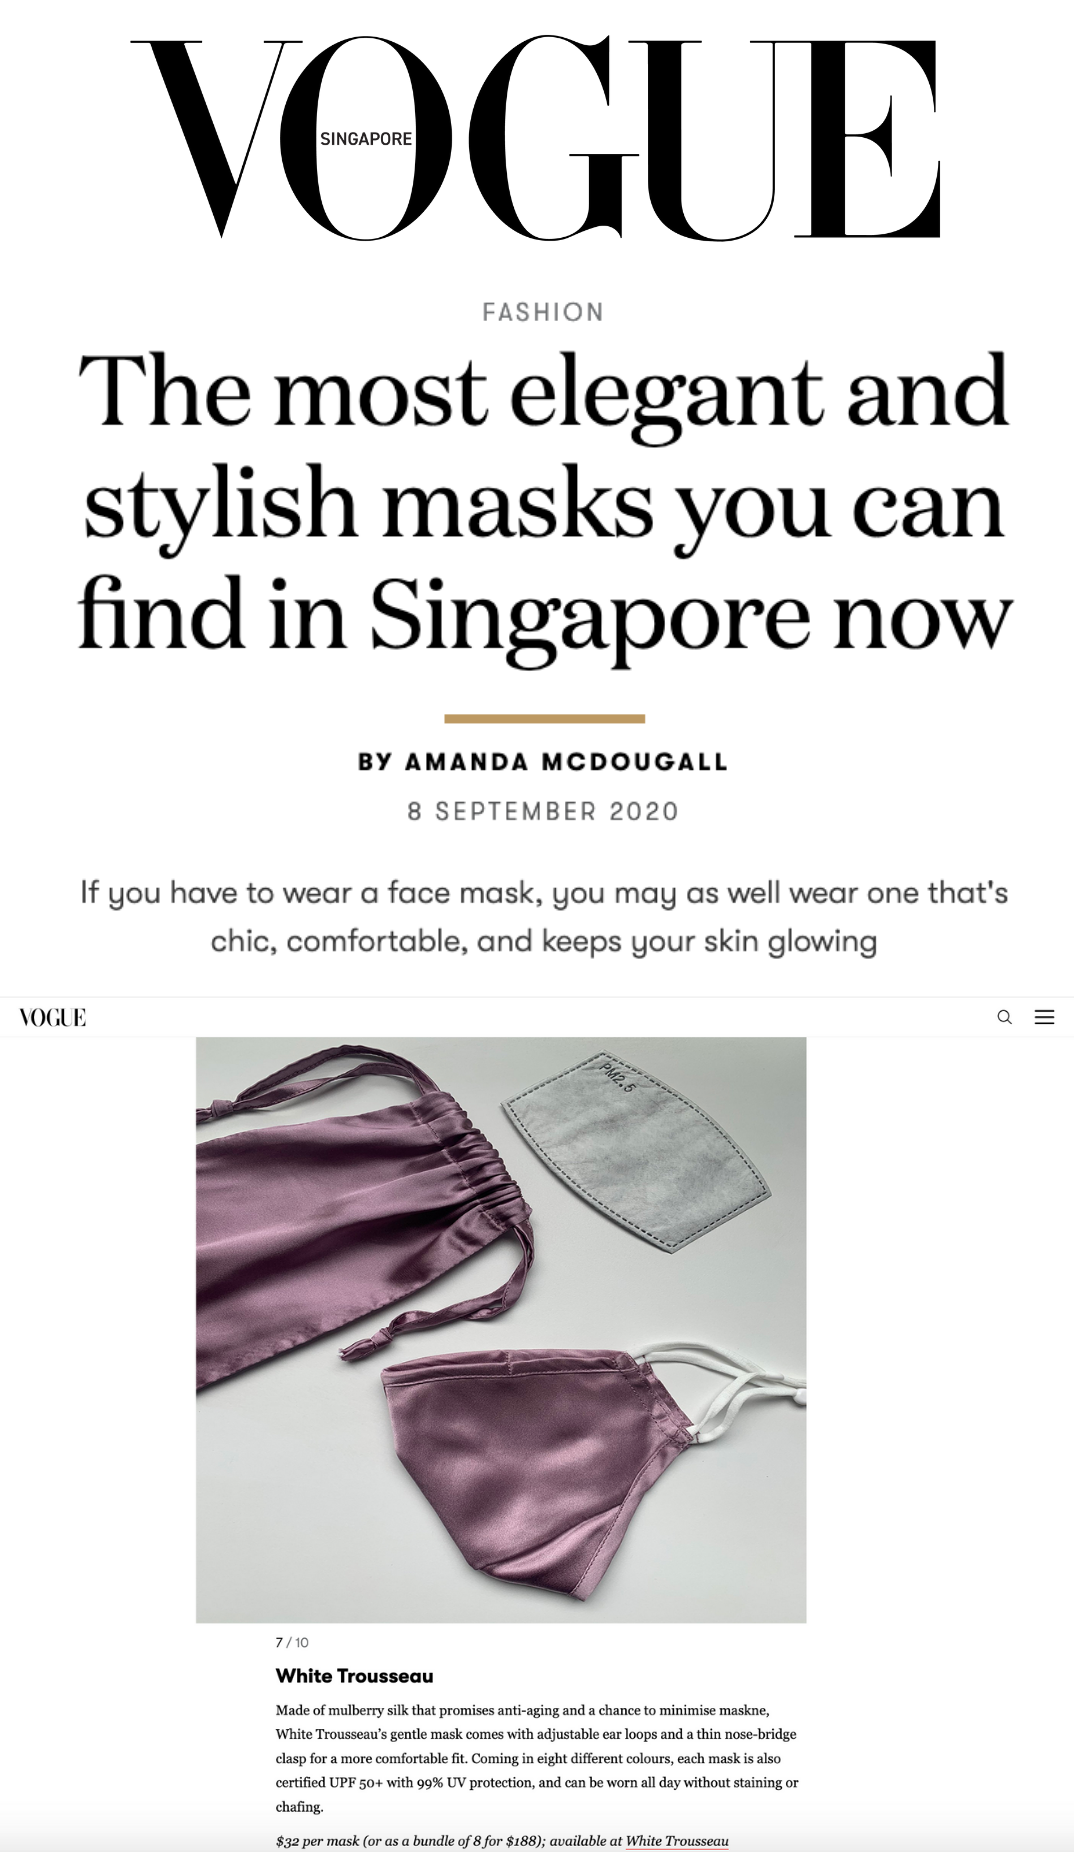 As featured on Vogue Singapore, our mulberry silk face masks with filter are some of the best in the market. High quality, fashionable, and affordable!